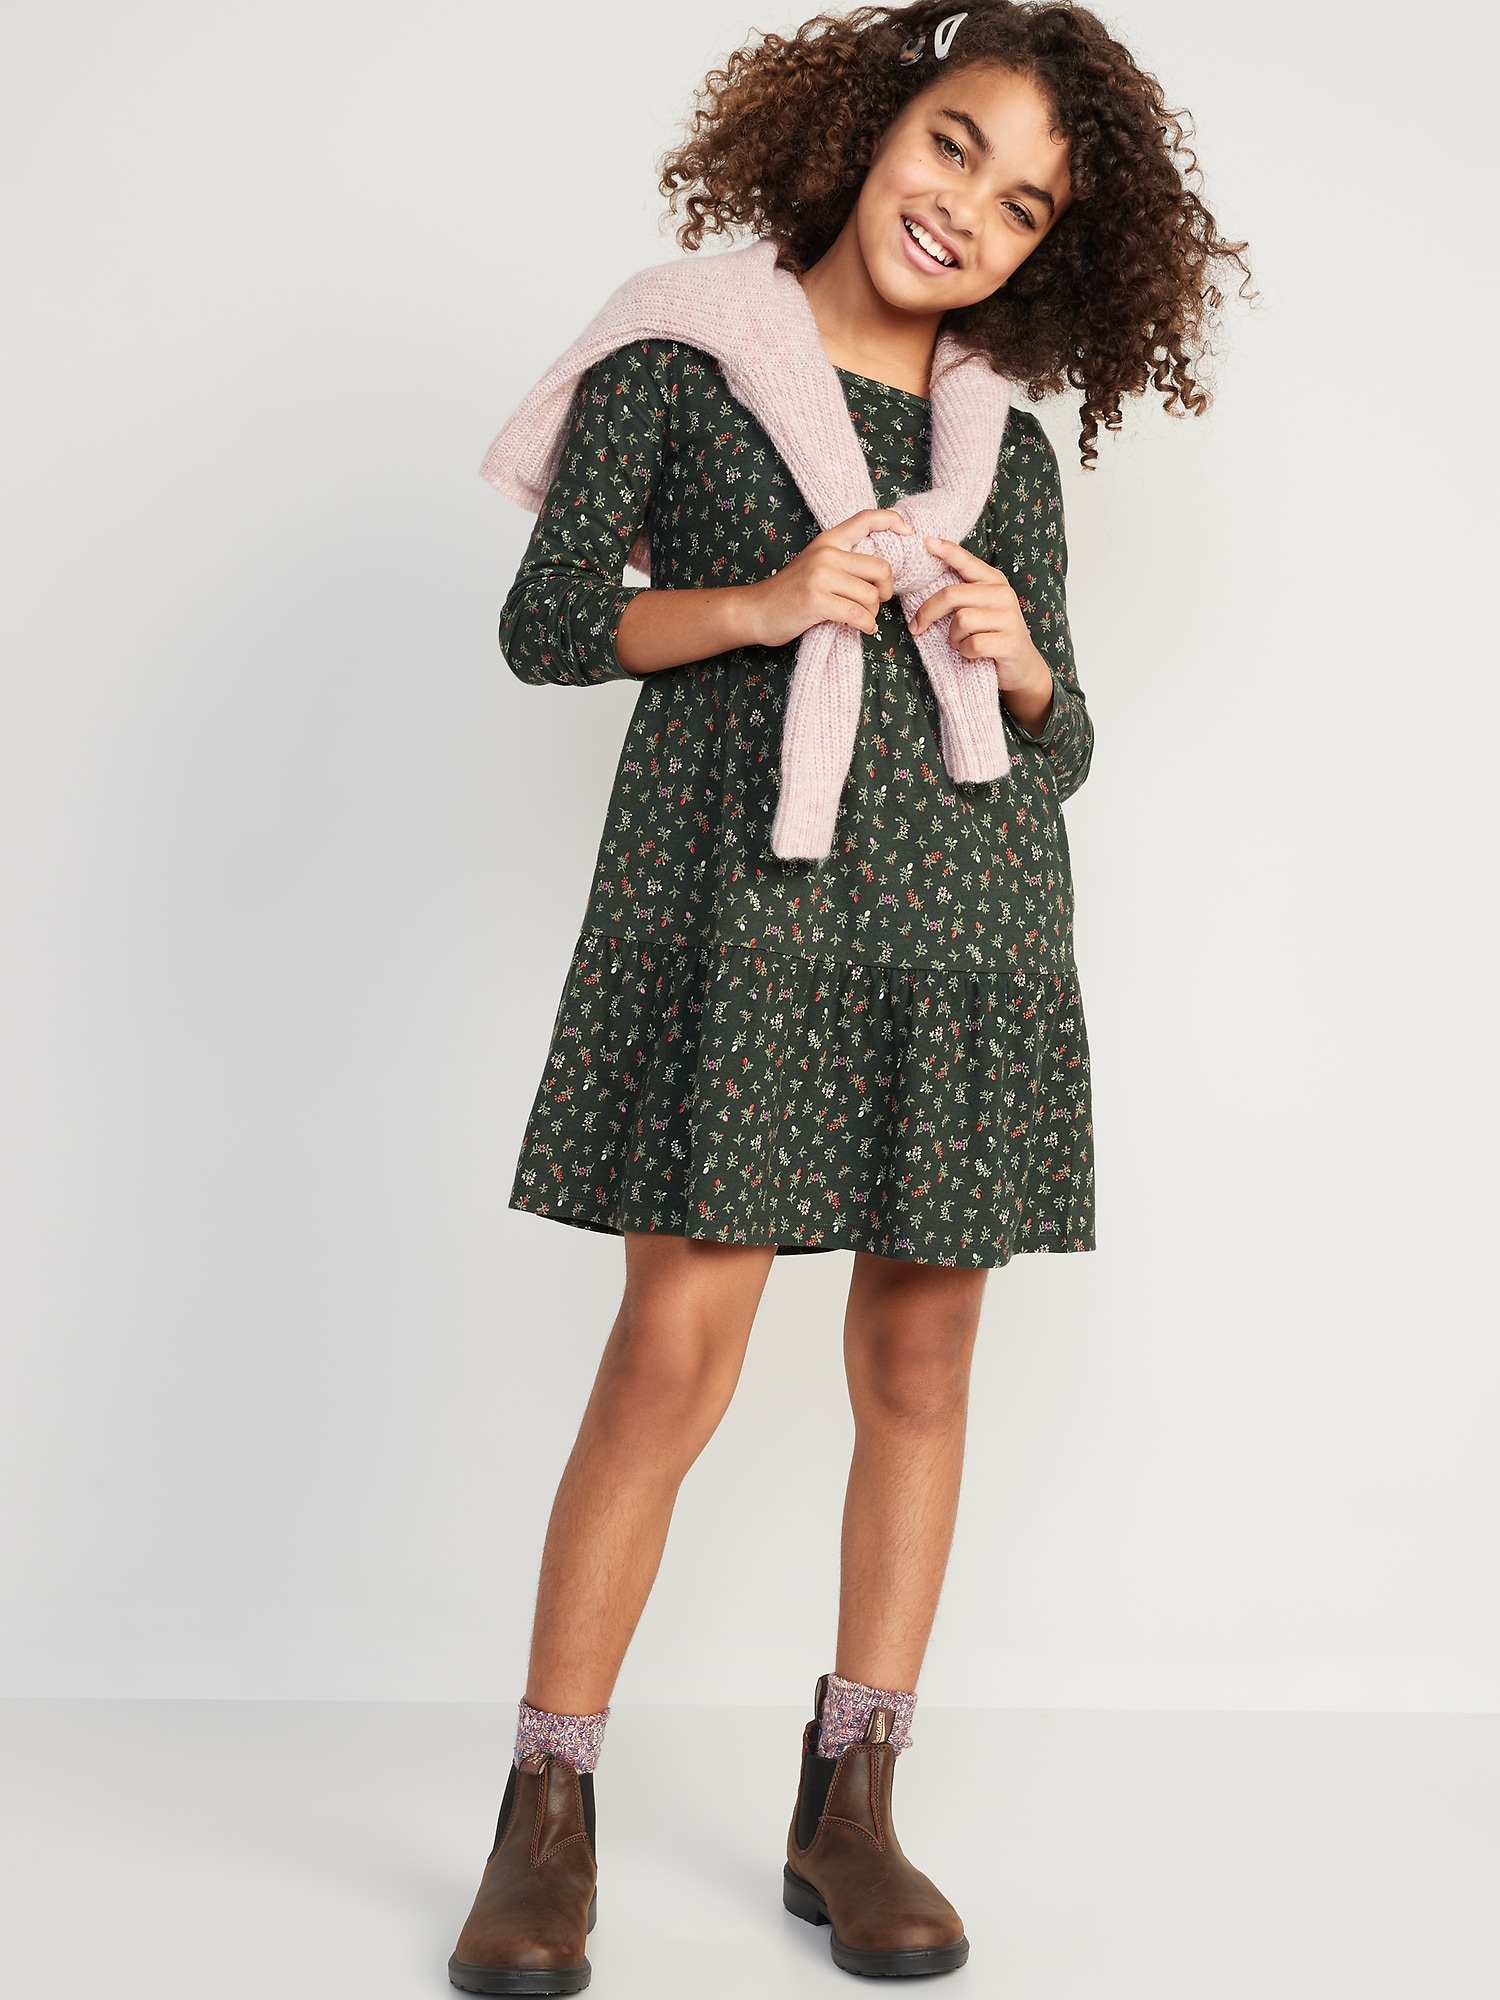 Oldnavy Tiered Printed Jersey-Knit Swing Dress for Girls